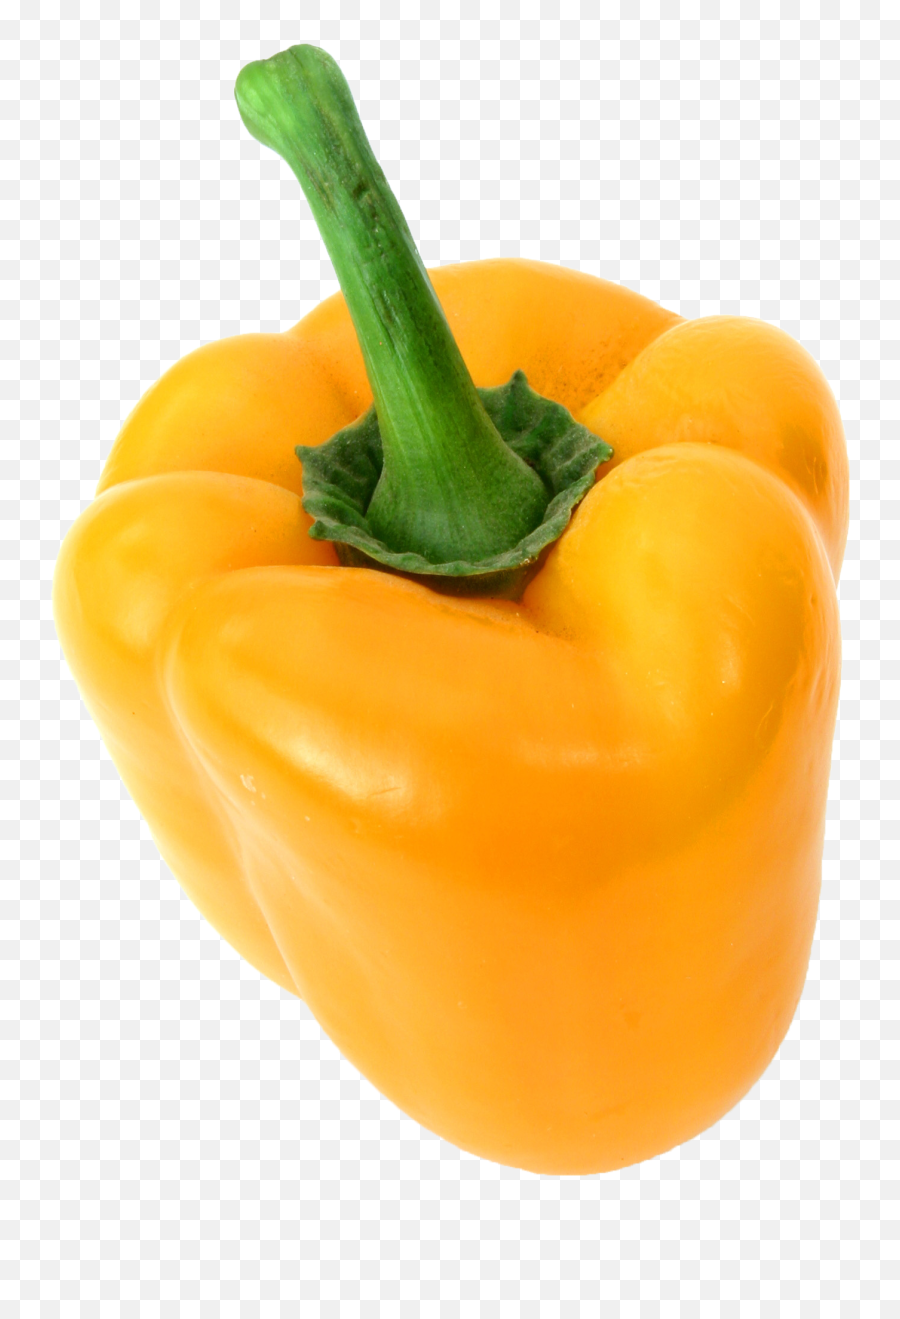 Bell Pepper Png Royalty - Free Image Pnglib U2013 Free Png Library Emoji,Is There A Bell Pepper Emoji?